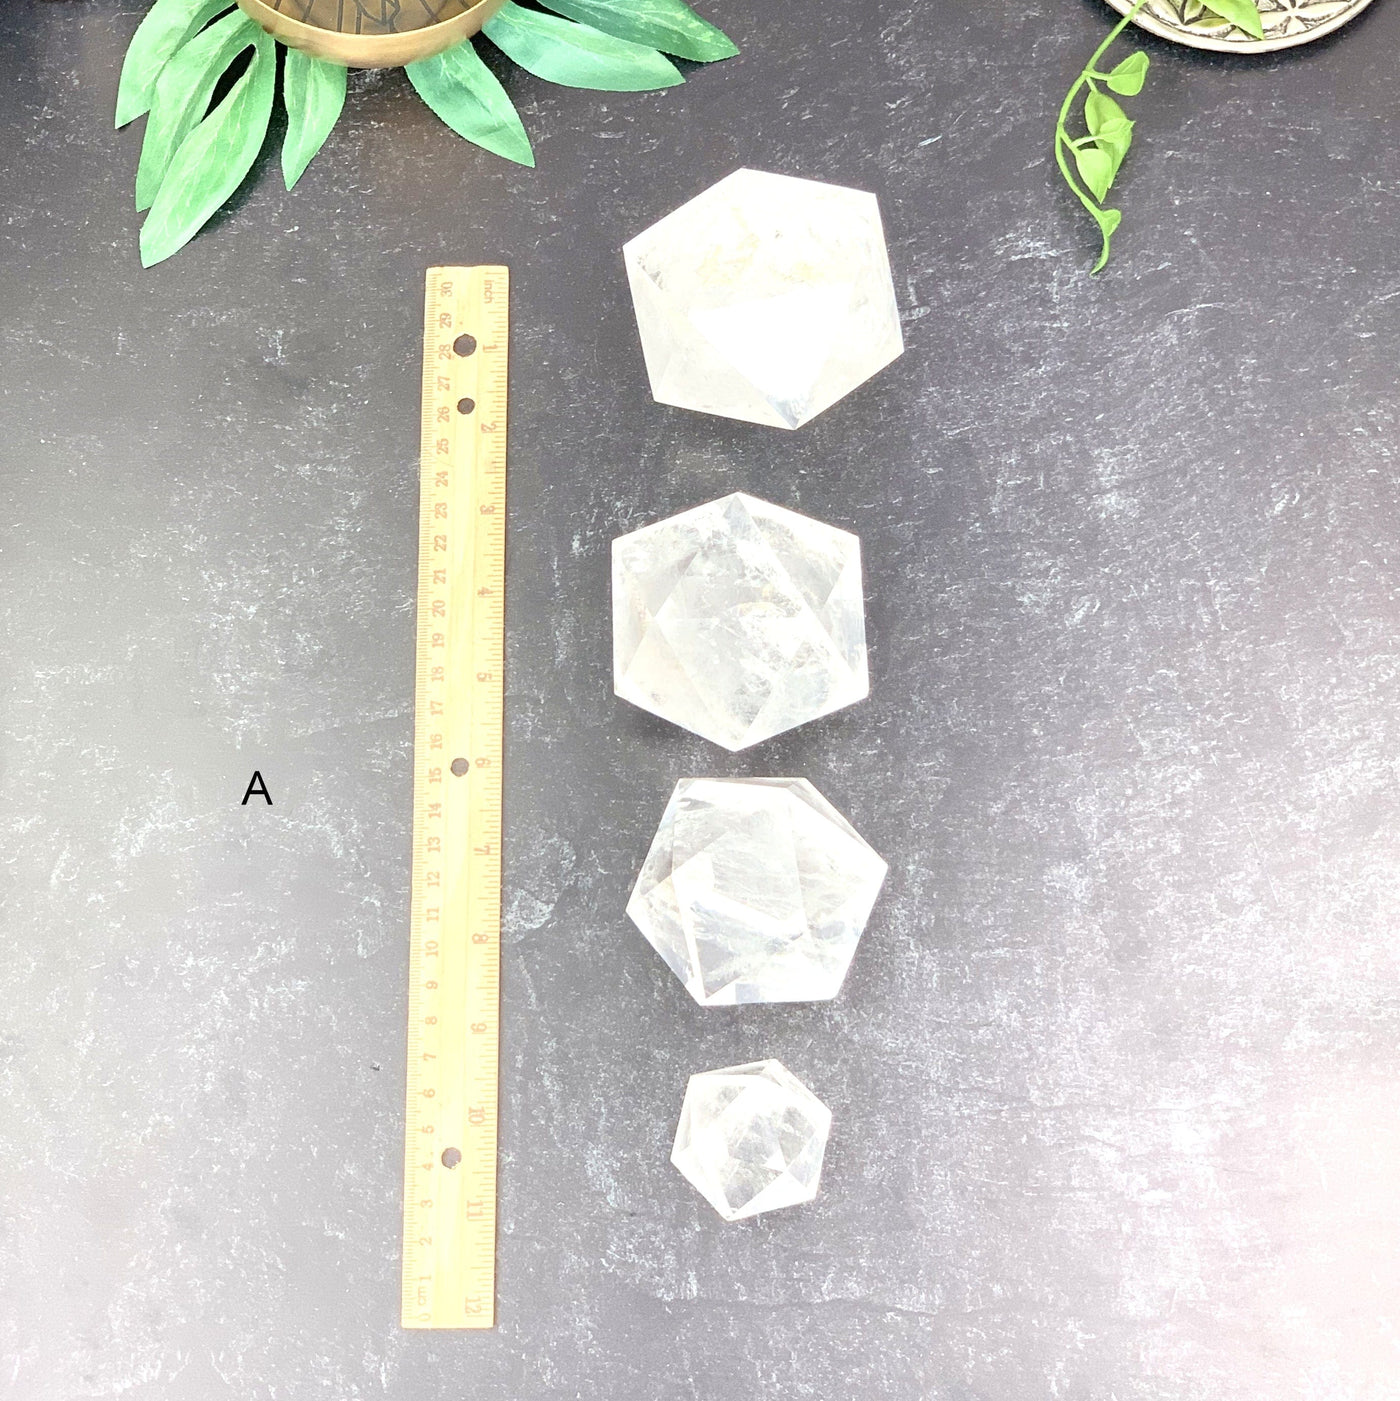 Ruler comparing size to the 1 set of Crystal Quartz Icosahedron option A